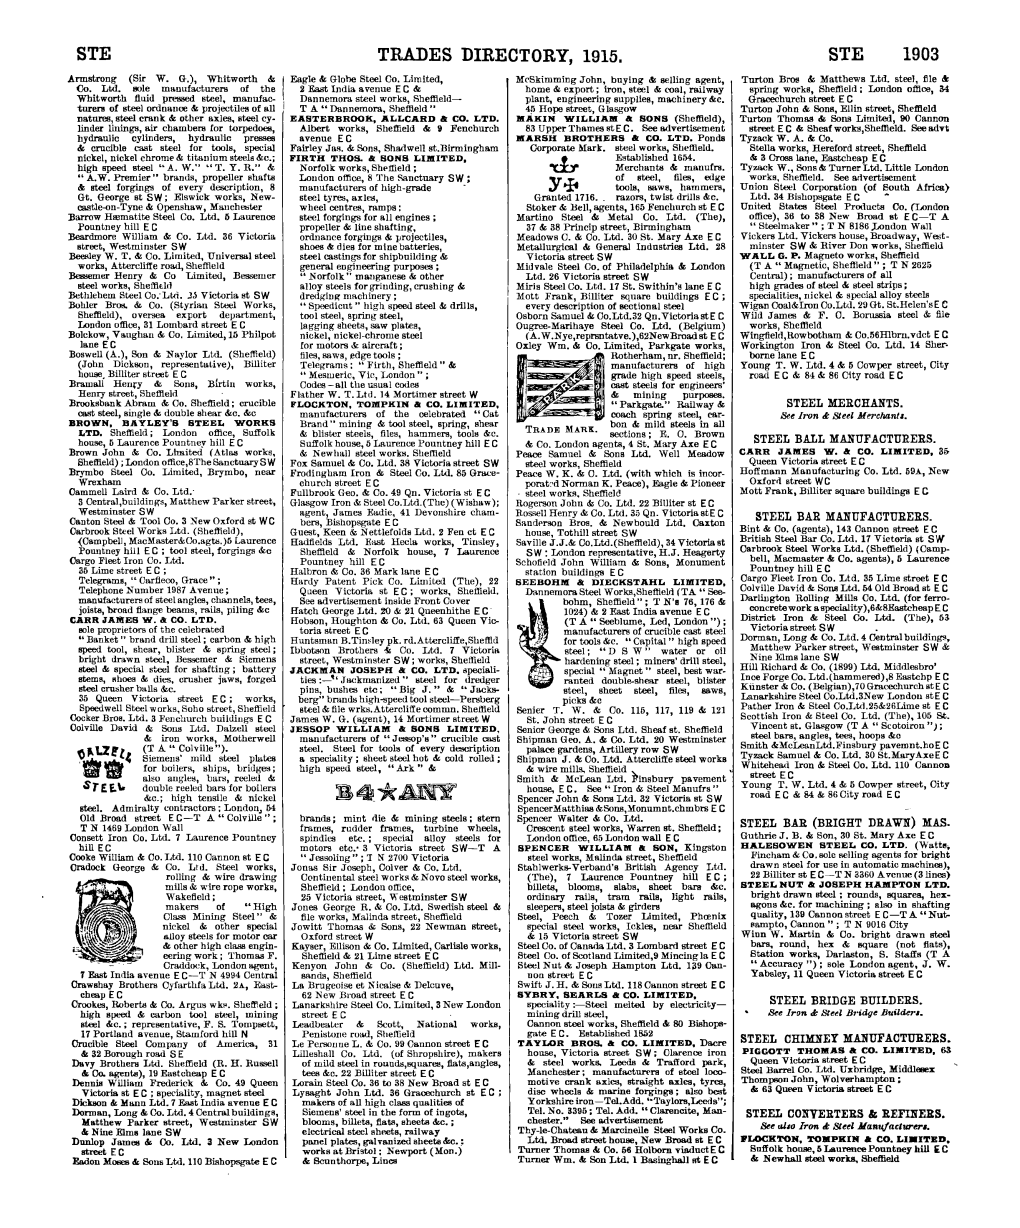 Trades Directory, 1915. Ste 1903